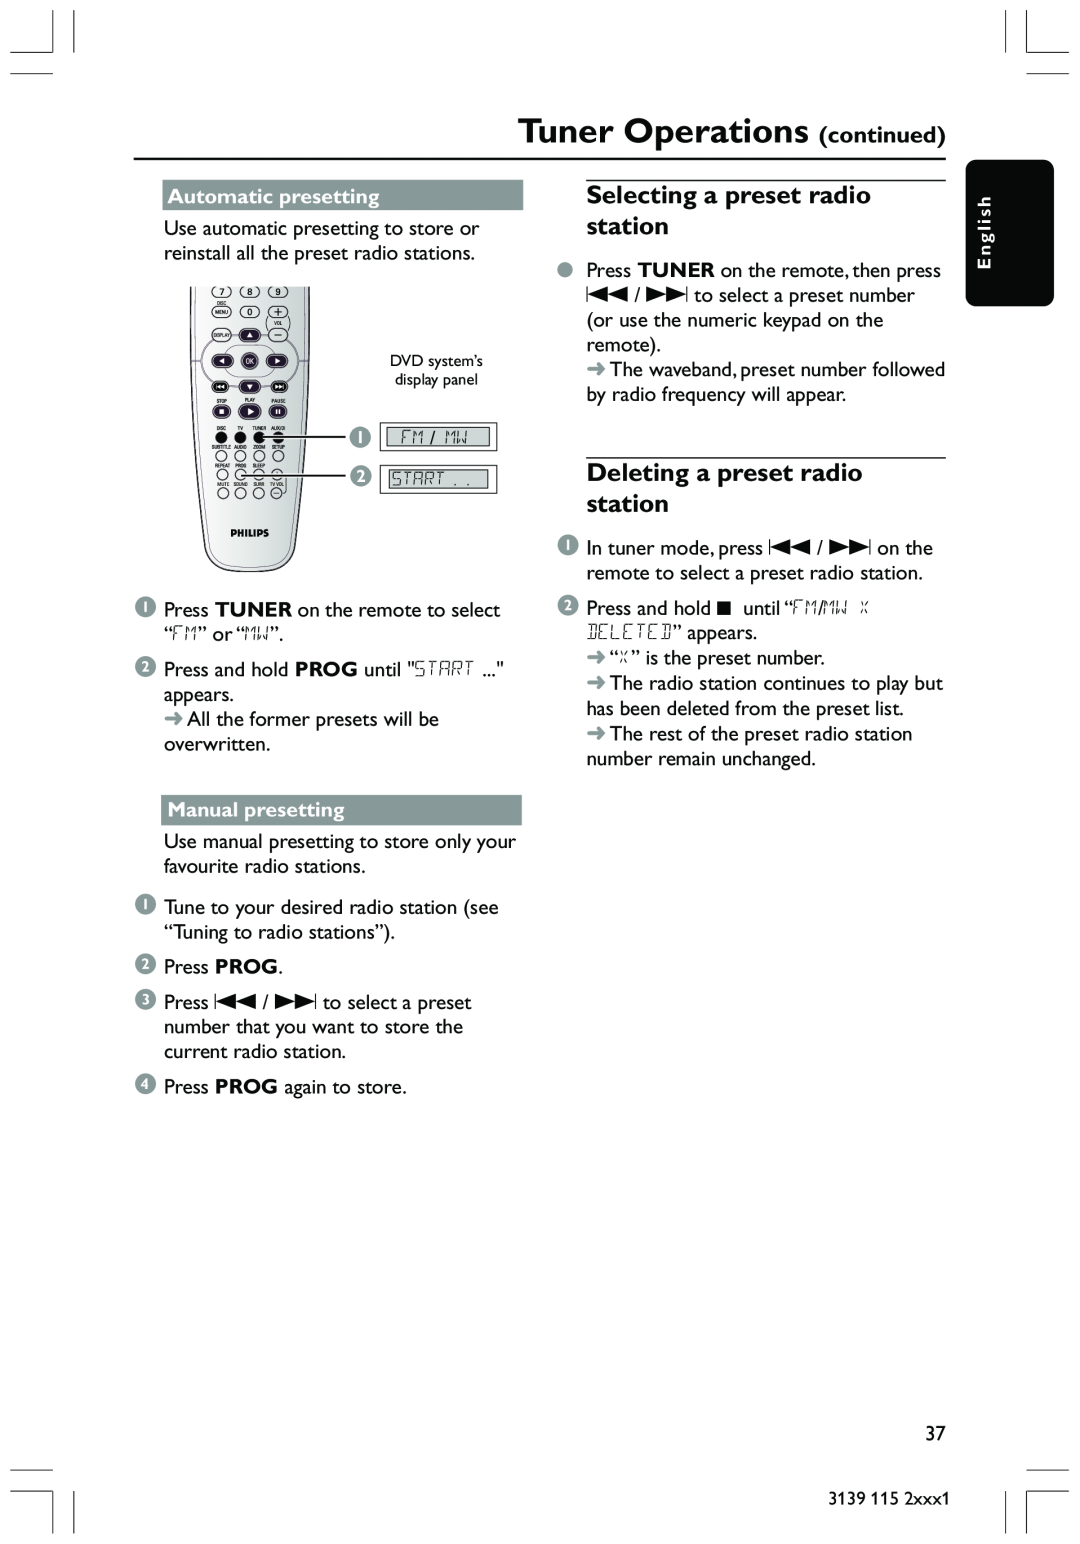 Philips HTS3300 user manual Tuner Operations continued, Selecting a preset radio station, Deleting a preset radio station 